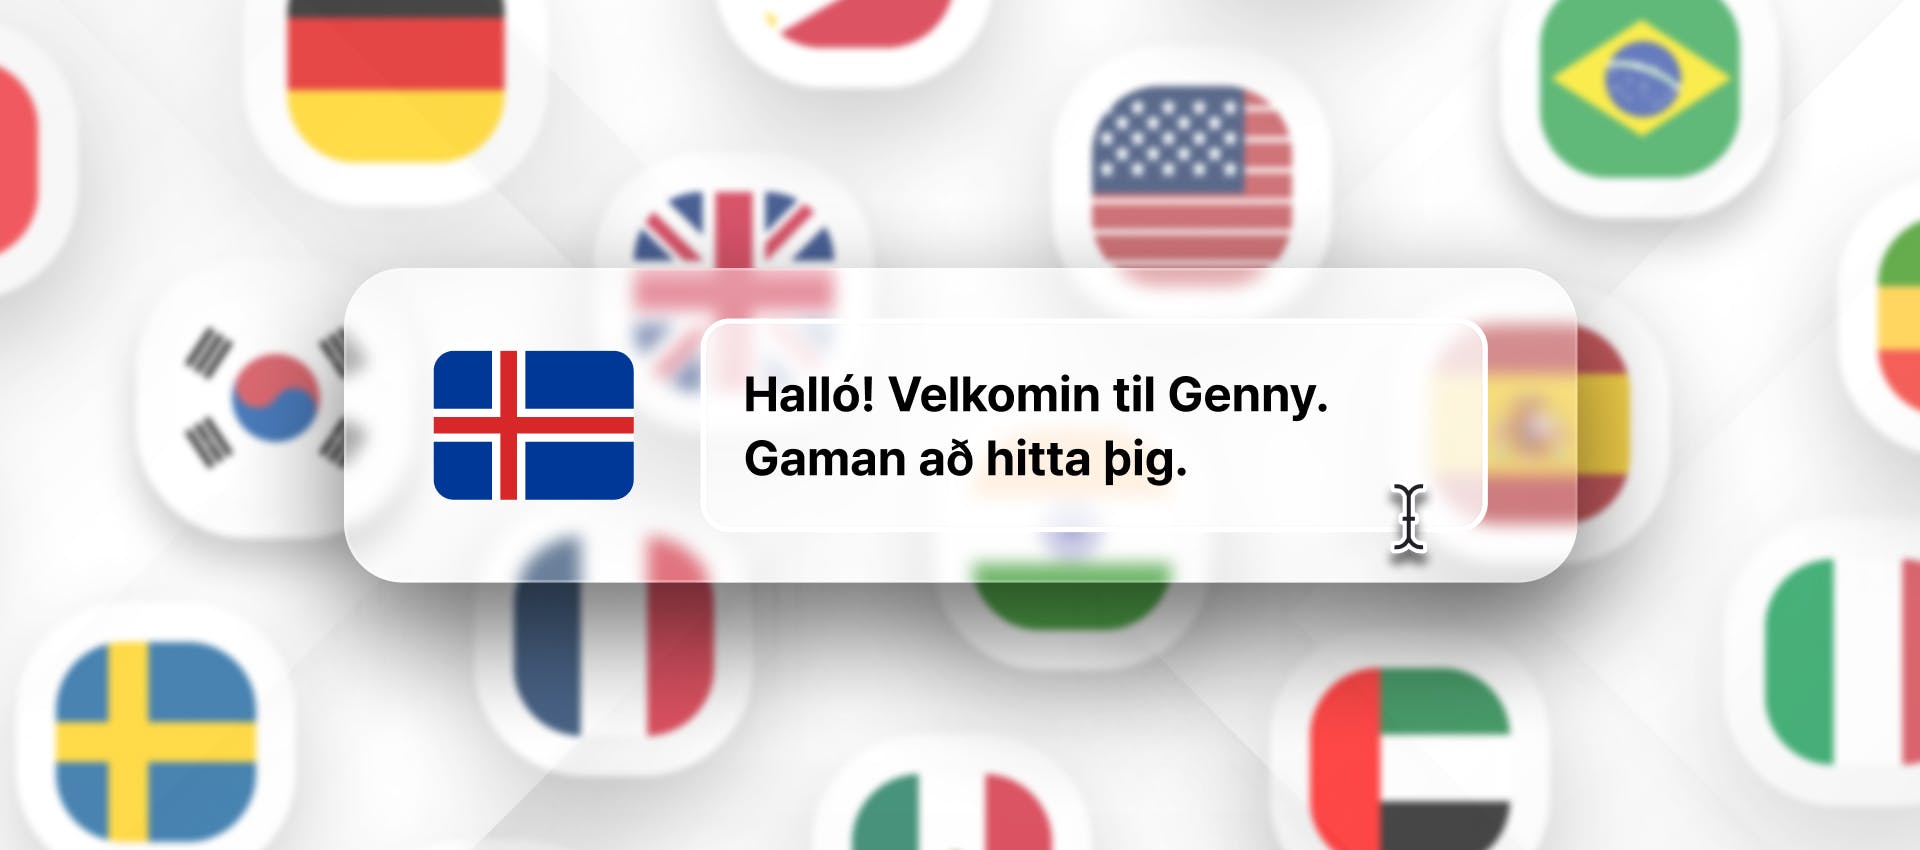 Icelandic phrase for Icelandic TTS generation with different flags in the background